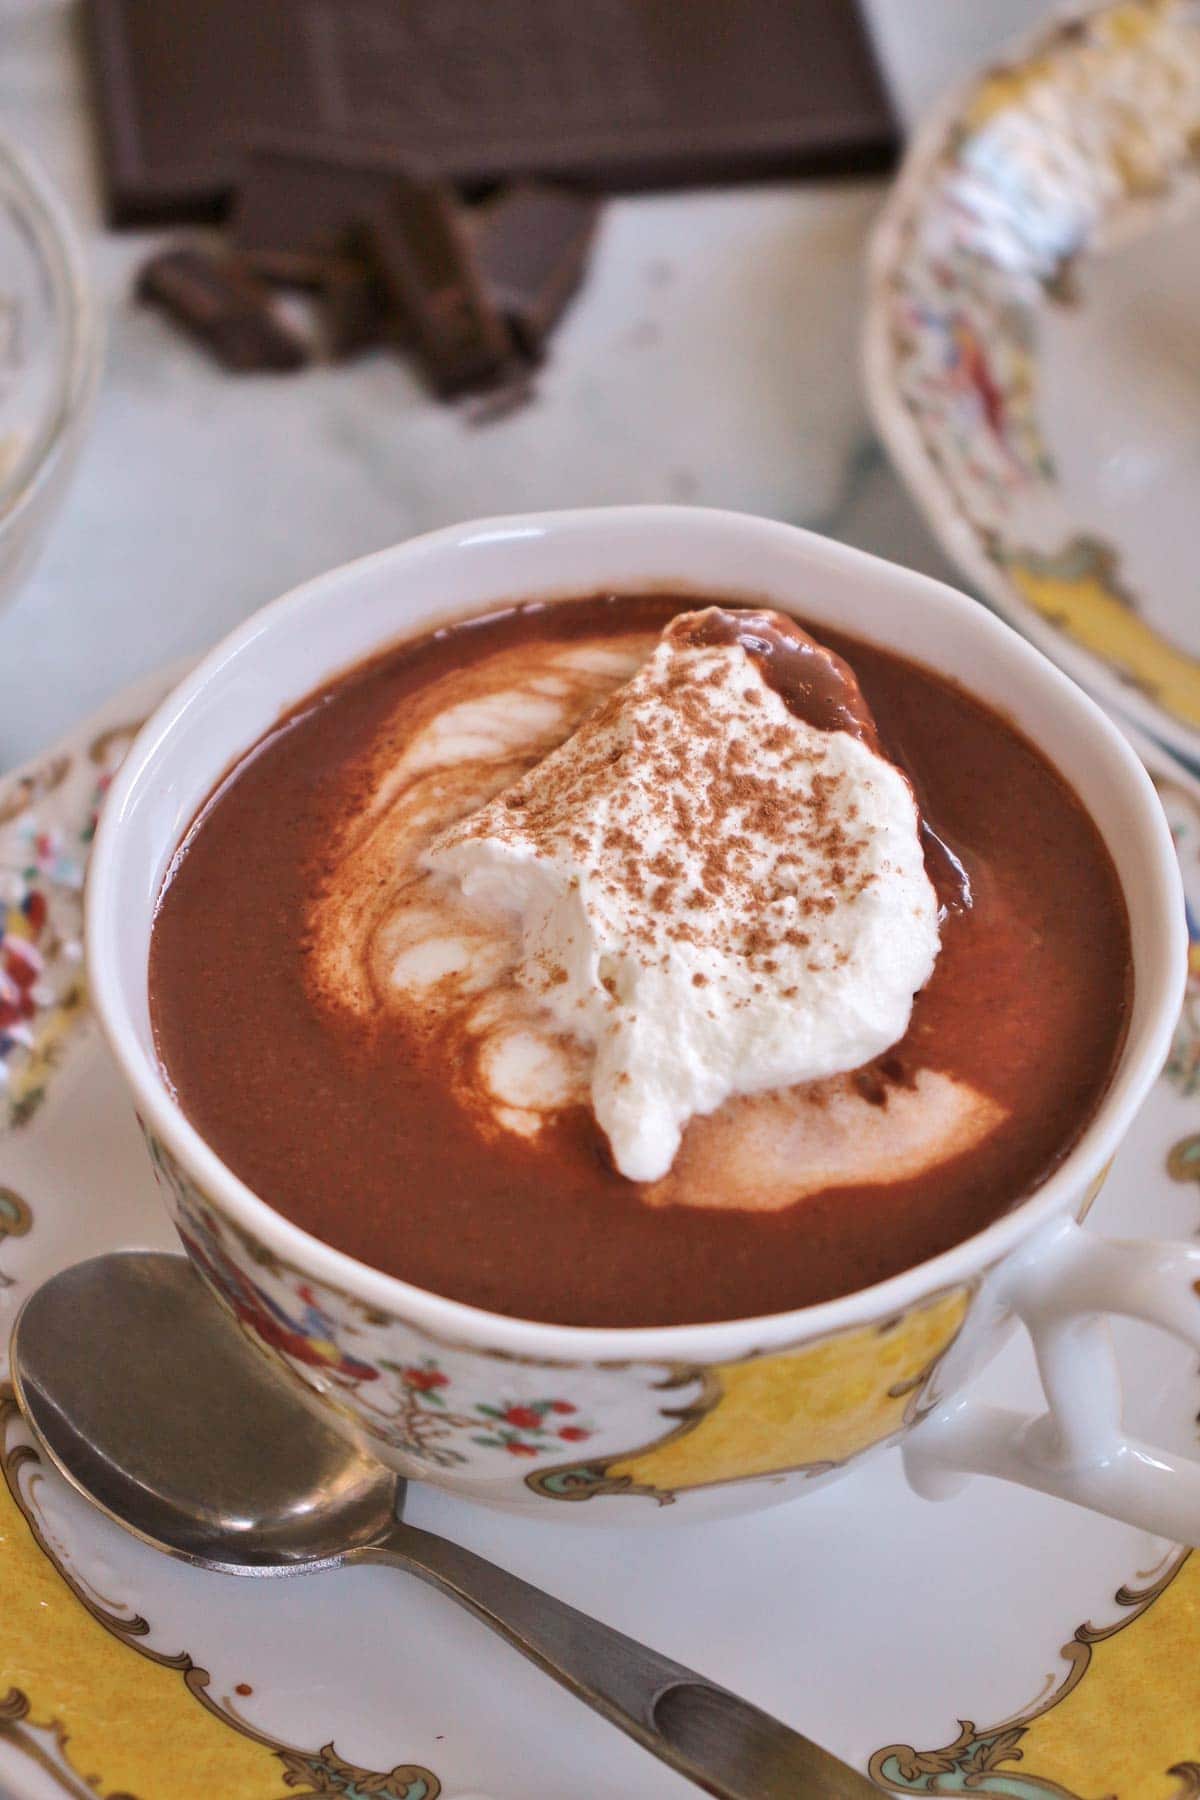 Closeup of a cup of hot chocolate with a dollop of whipped cream on top.